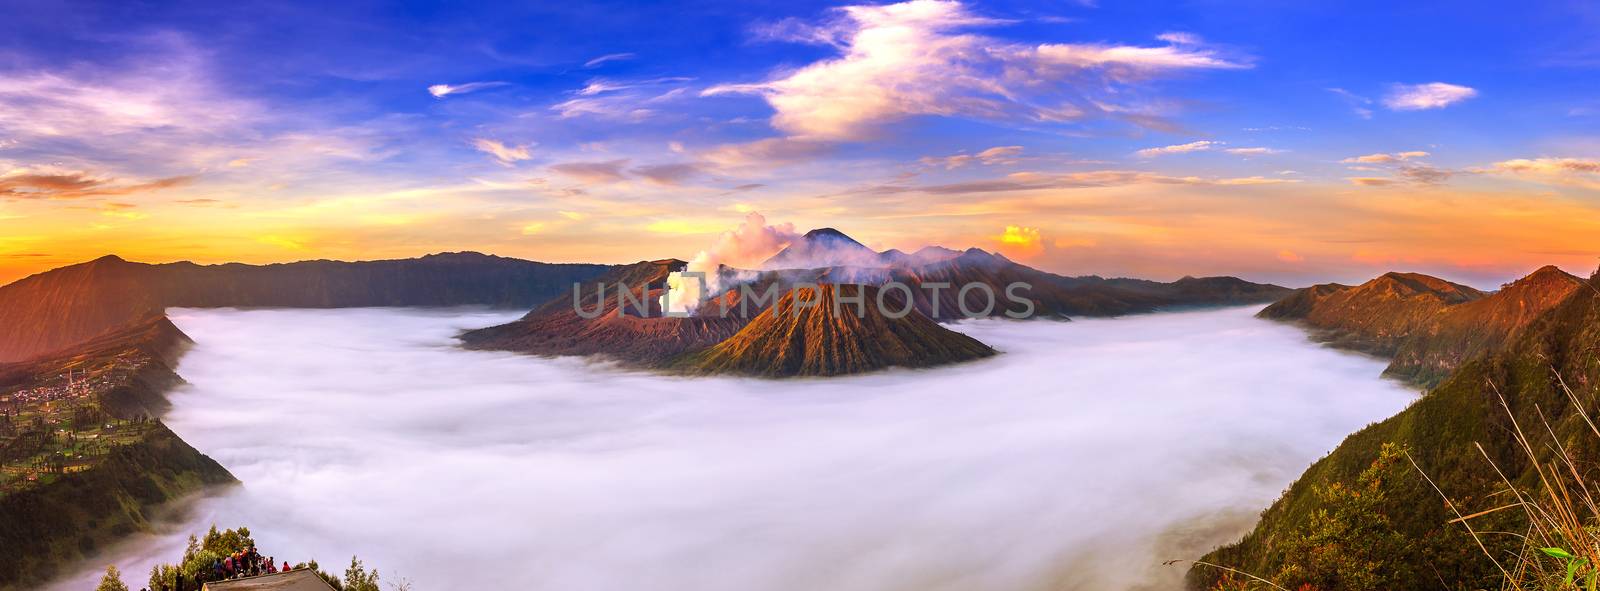 Mount Bromo volcano (Gunung Bromo) during sunrise from viewpoint on Mount Penanjakan in Bromo Tengger Semeru National Park, East Java, Indonesia. by gutarphotoghaphy